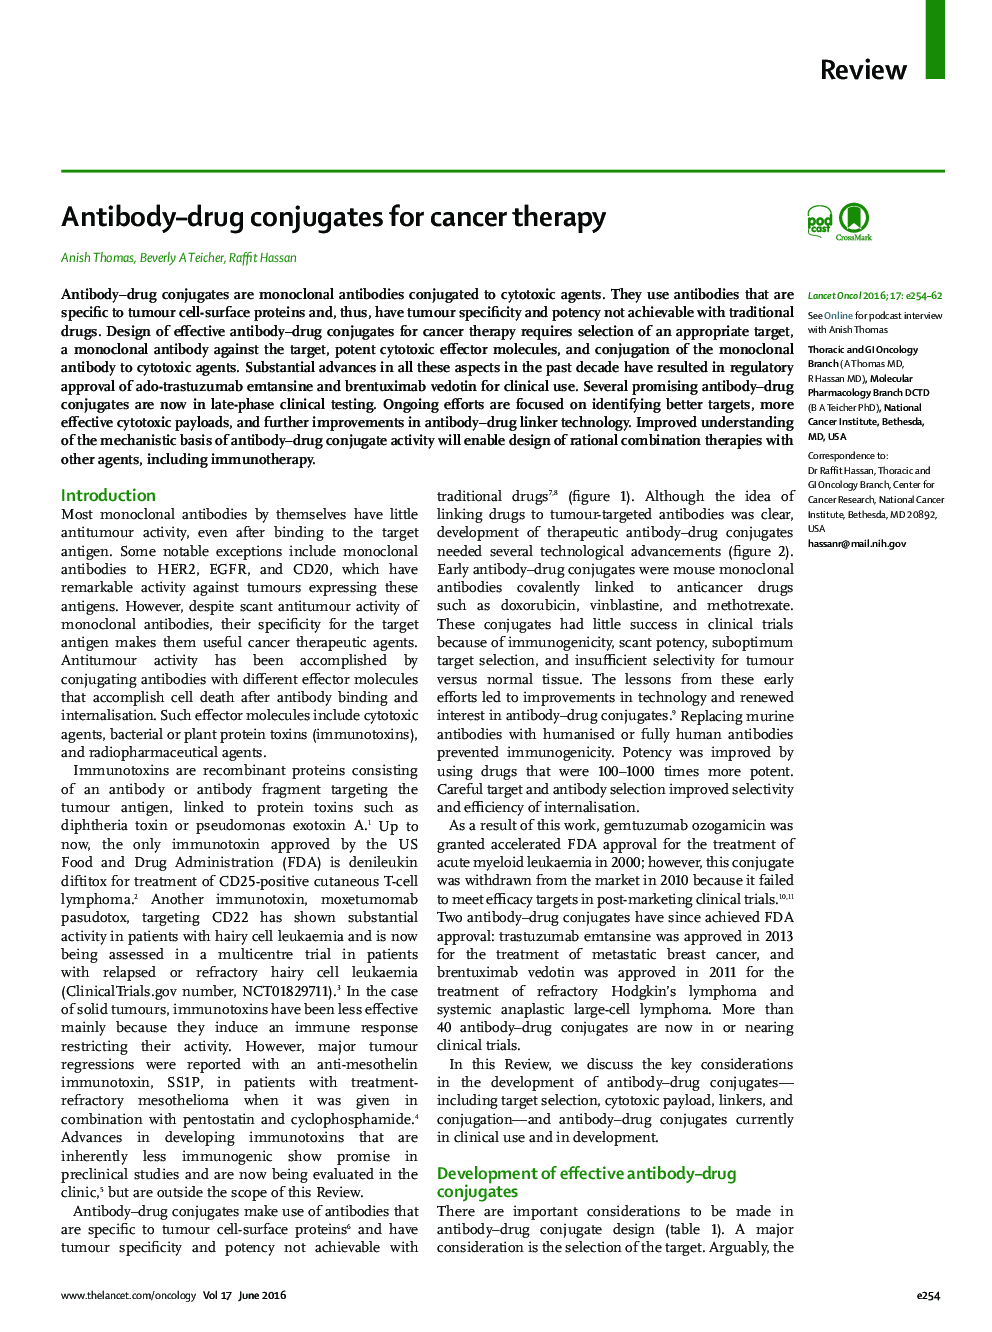 Antibody–drug conjugates for cancer therapy